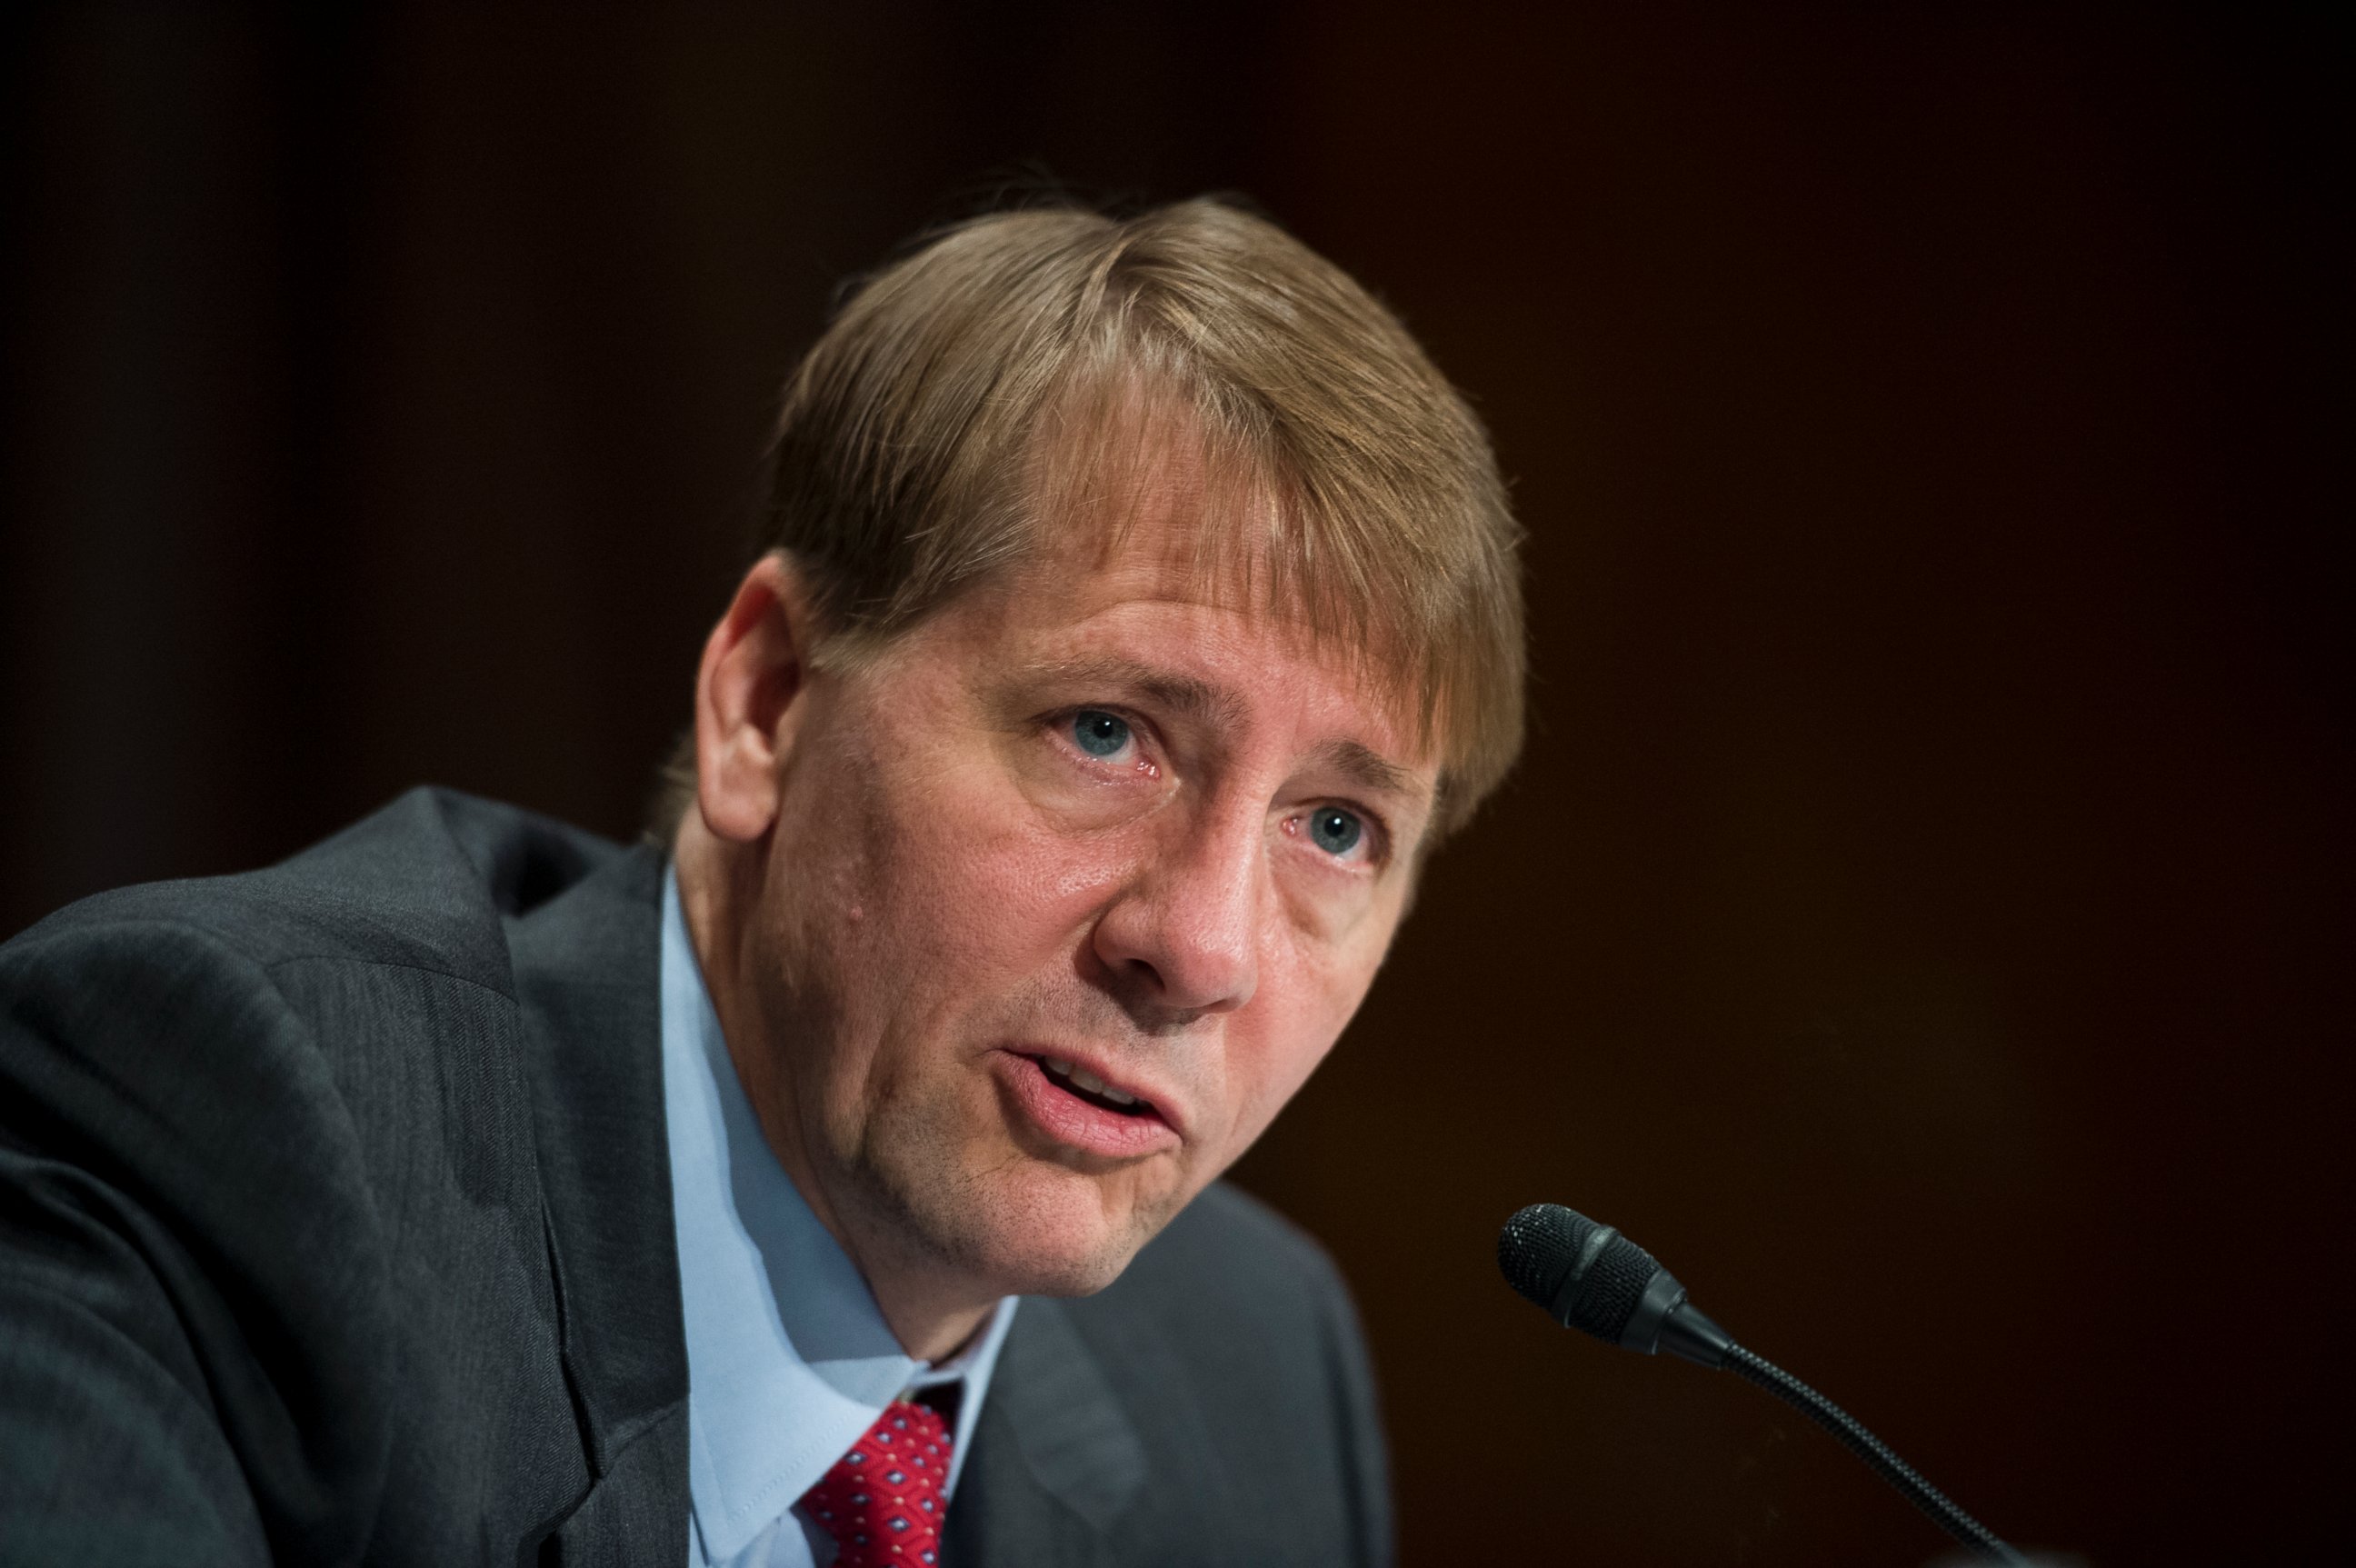 PHOTO: In this file photo, Consumer Financial Protection Bureau Director Richard Cordray testifies during the Senate Banking, Housing and Urban Affairs Committee hearing on the CFPB's semi-annual report to Congress, July 15, 2015. 